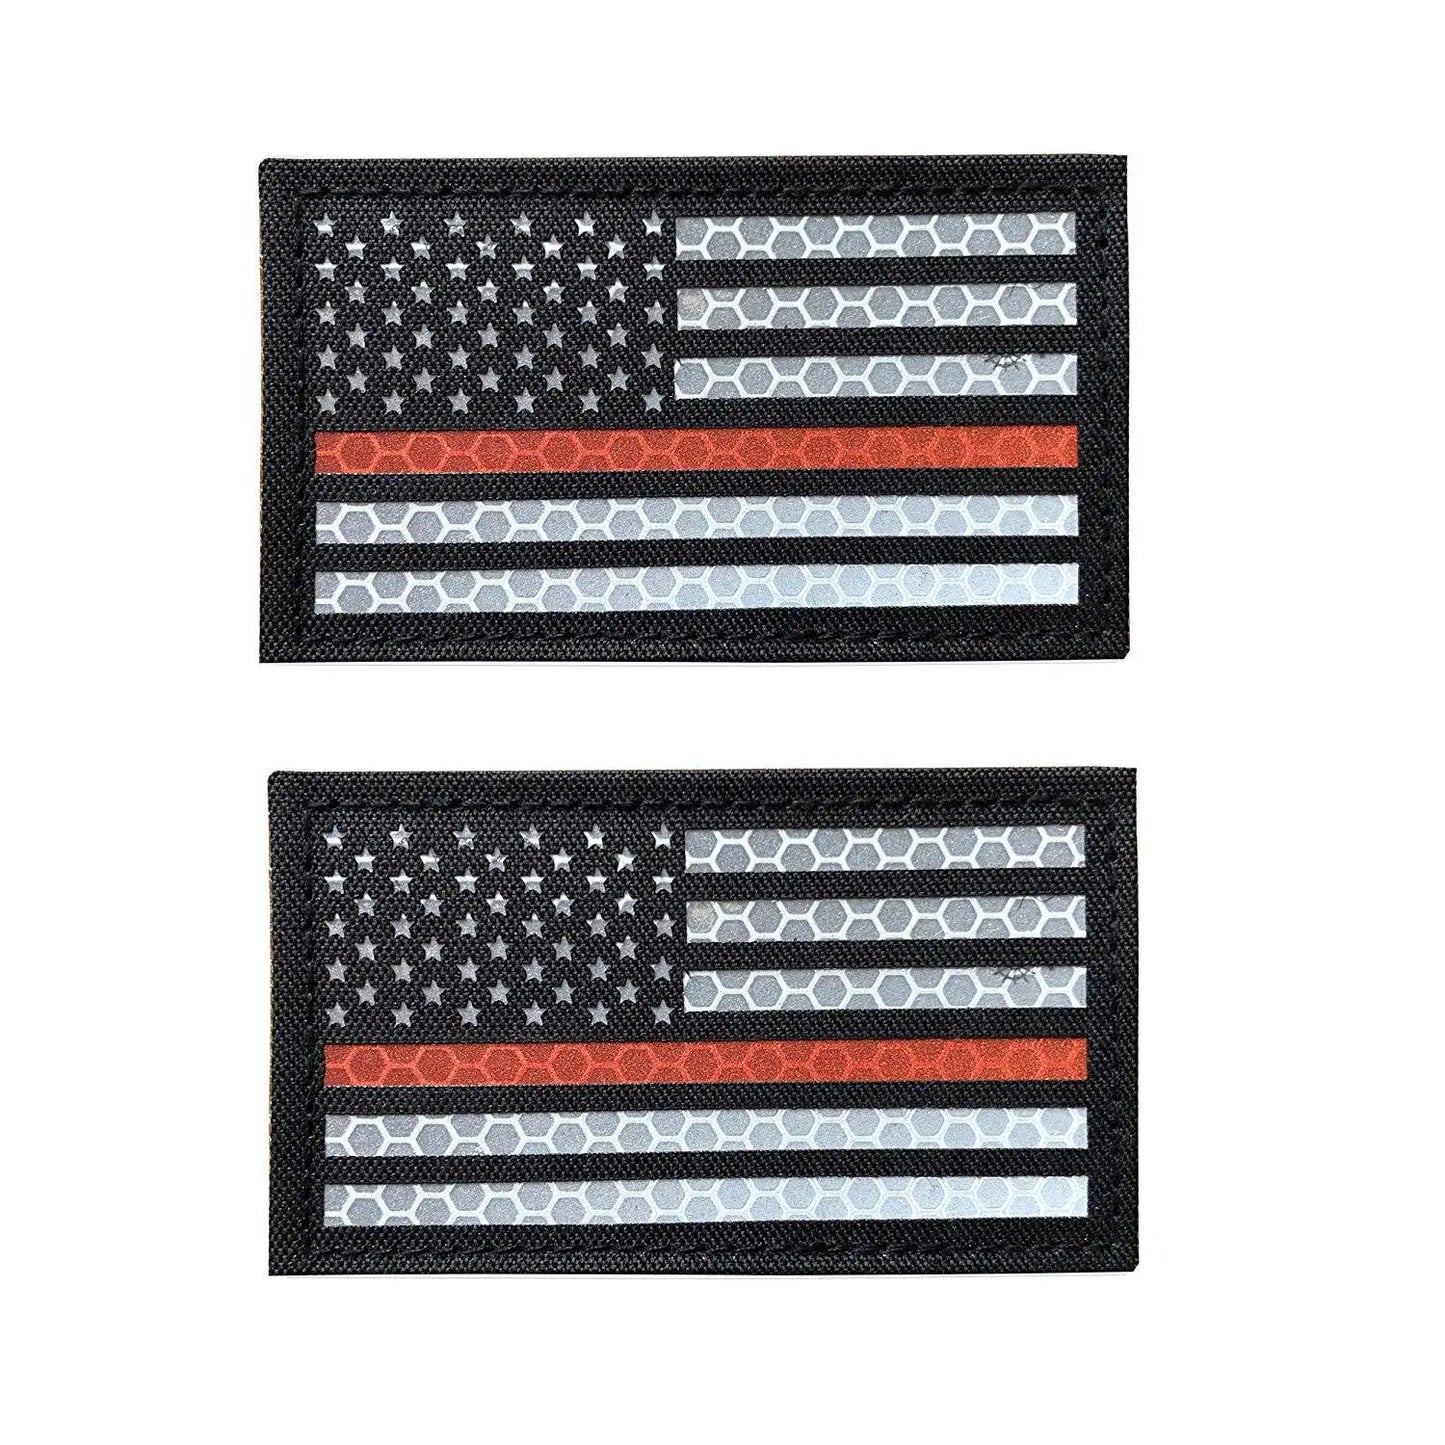 US Flag Reflective Patch USA  SRT Military Special Forces Tactical Fastener Patch Hook and Loop Army Badge Armband Costumes DIY